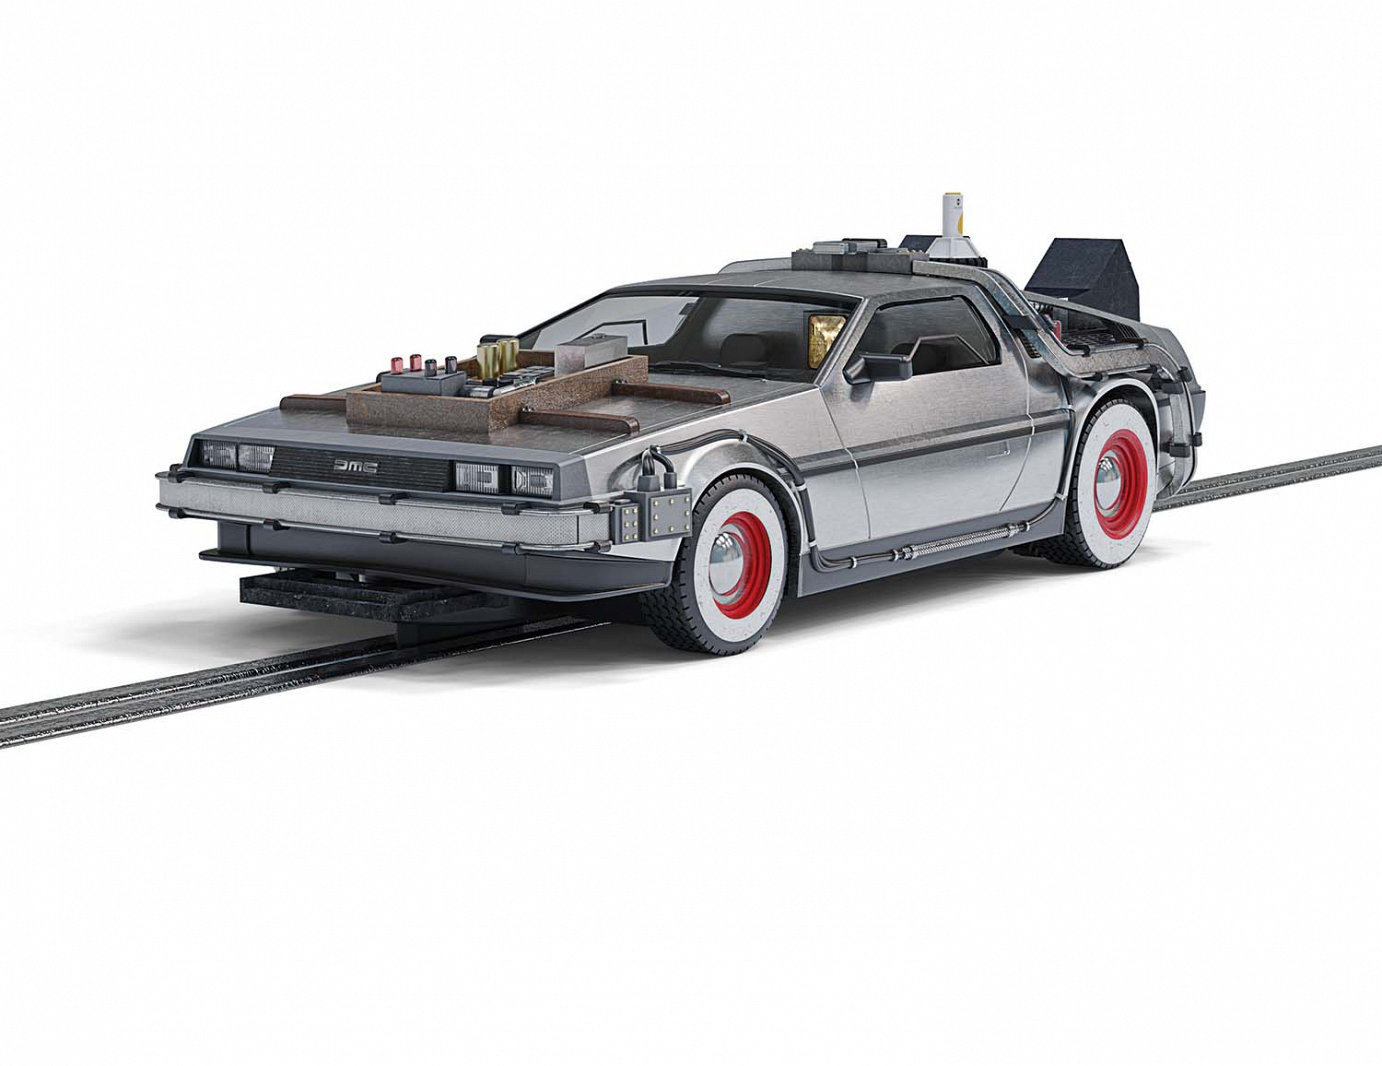 BACK TO THE FUTURE 3 TIME MACHINE